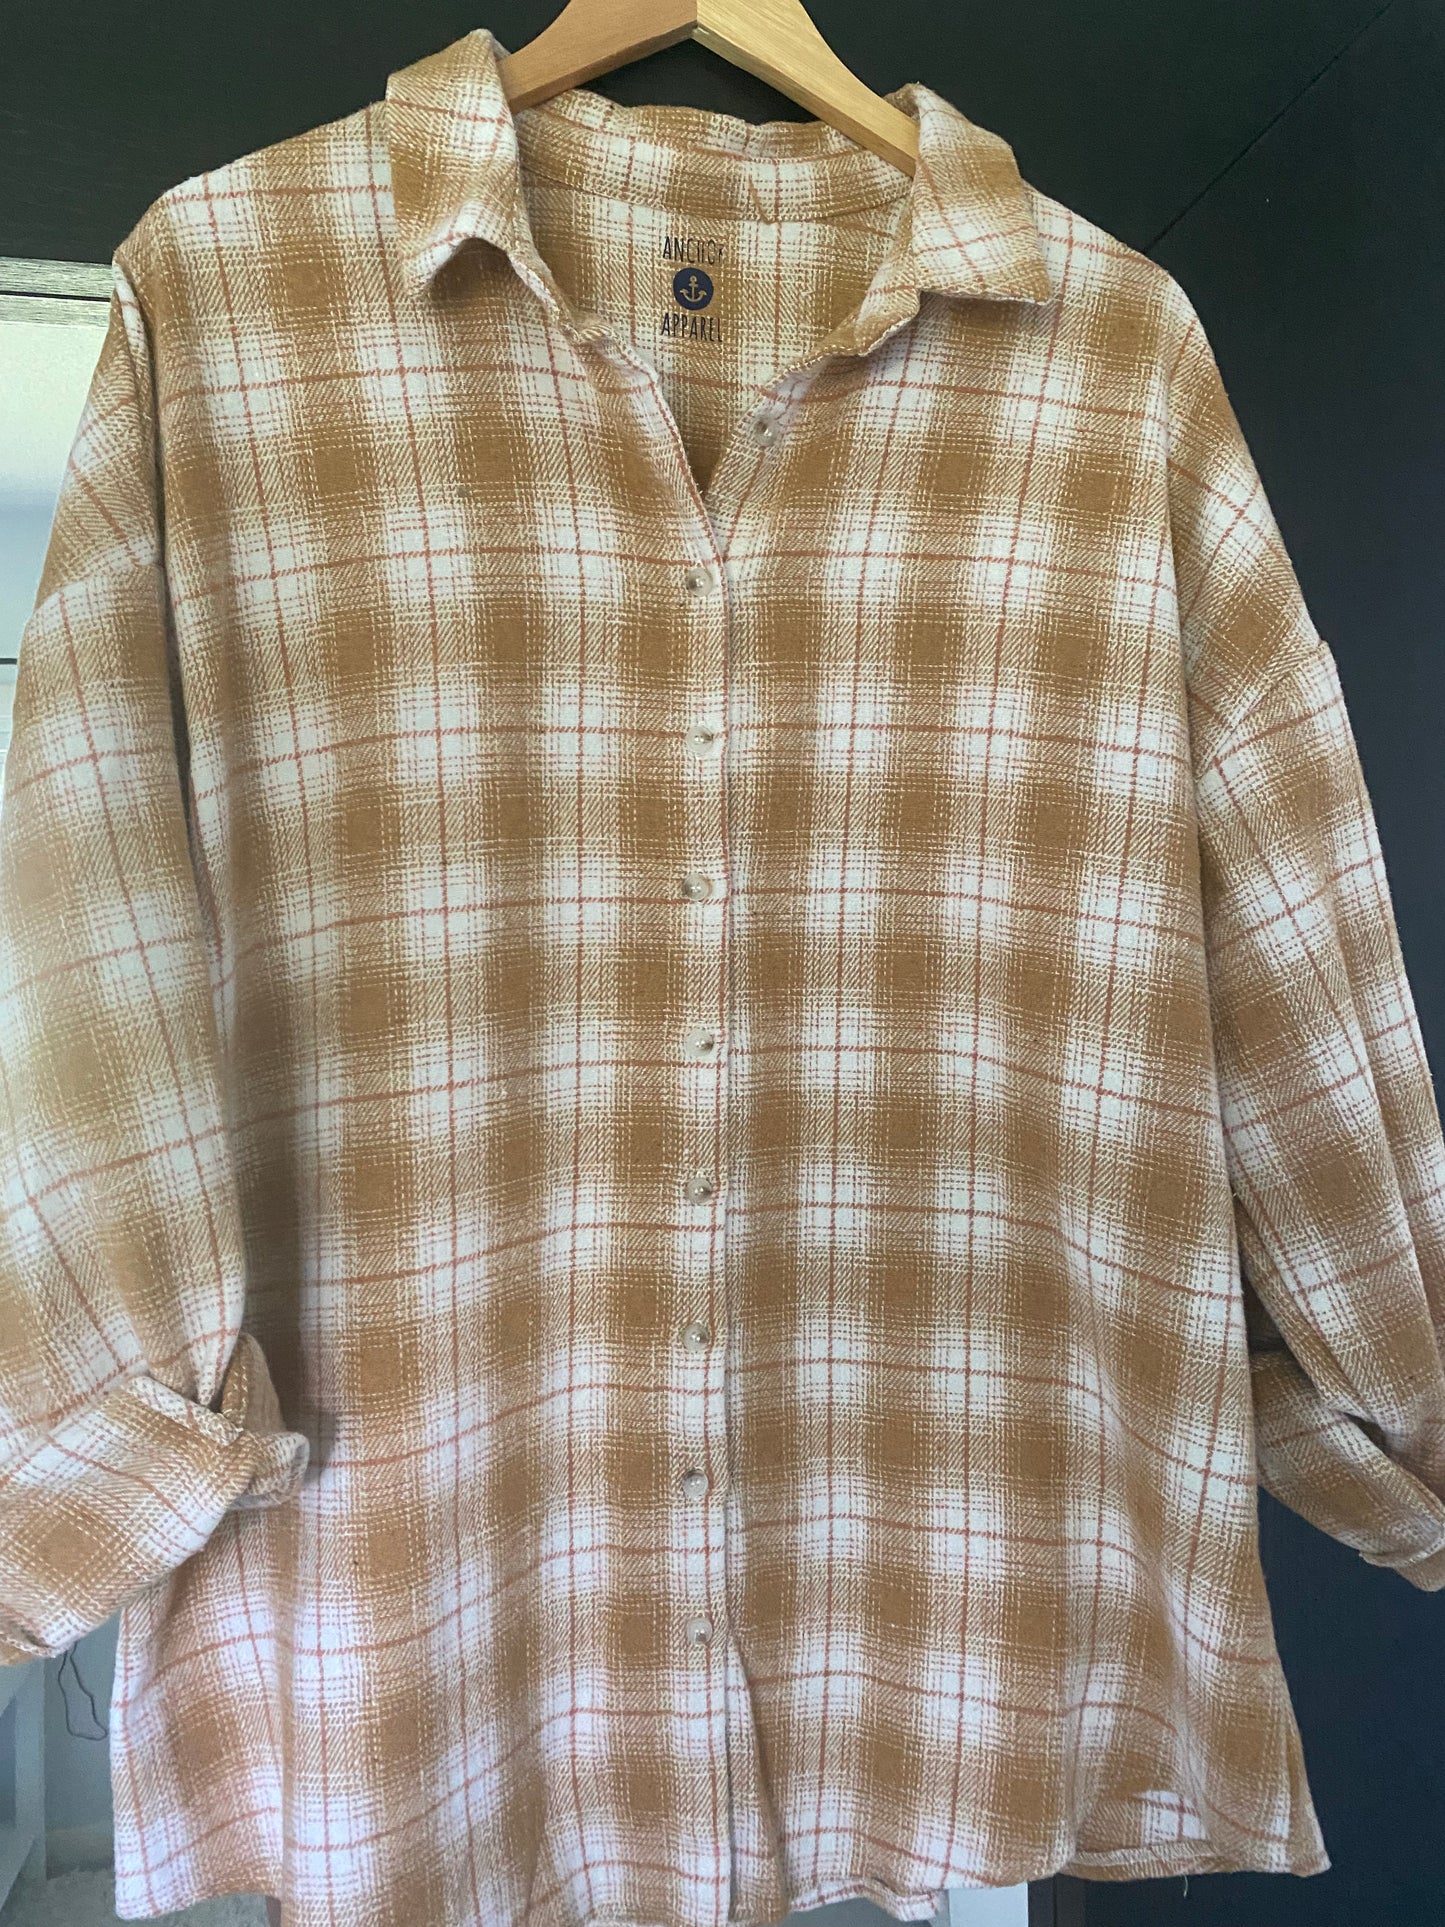 Yellow flannel